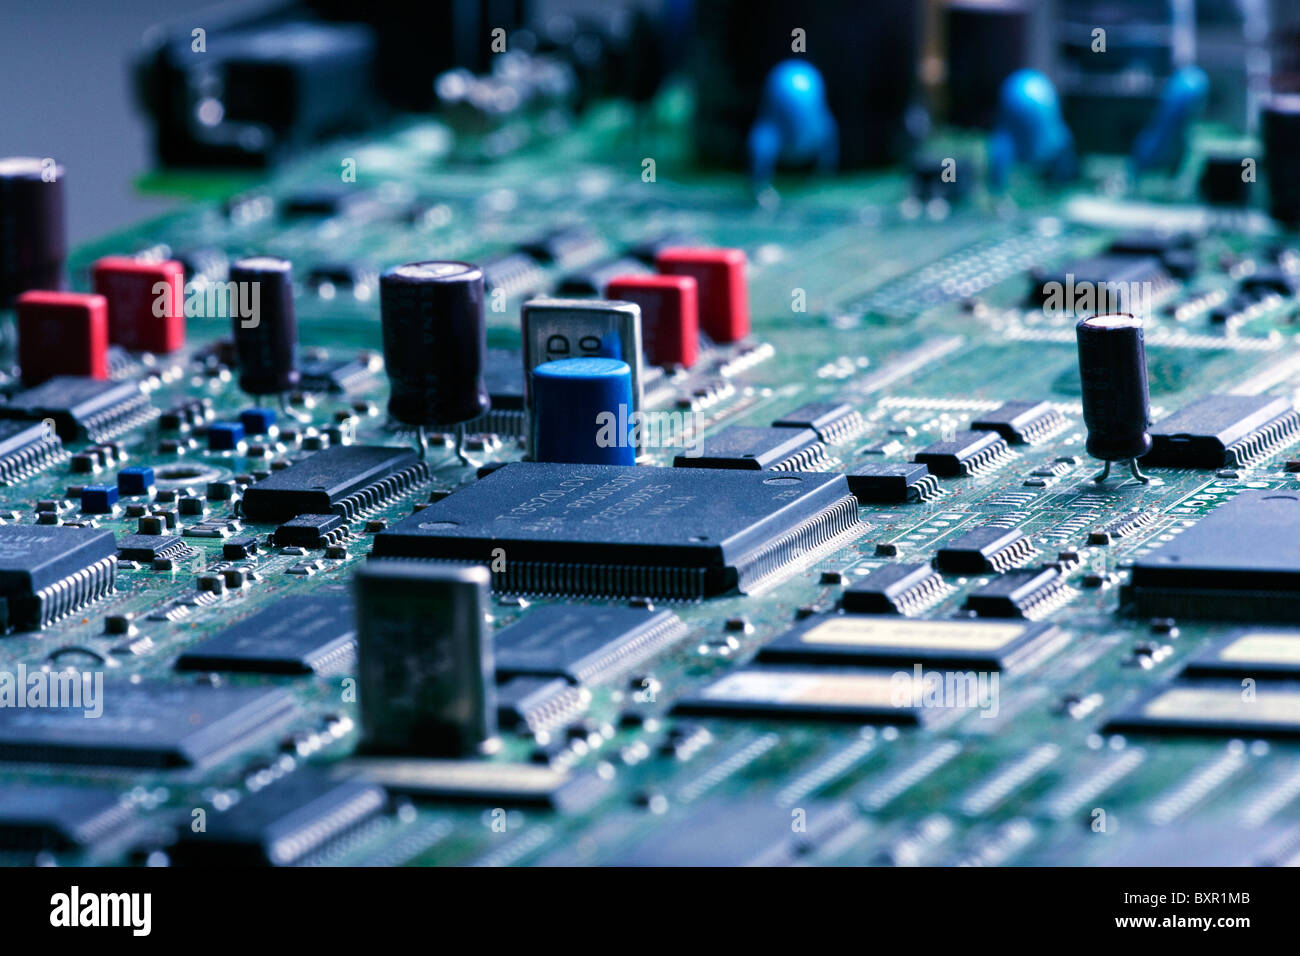 printed circuit board showing various electronic components Stock Photo